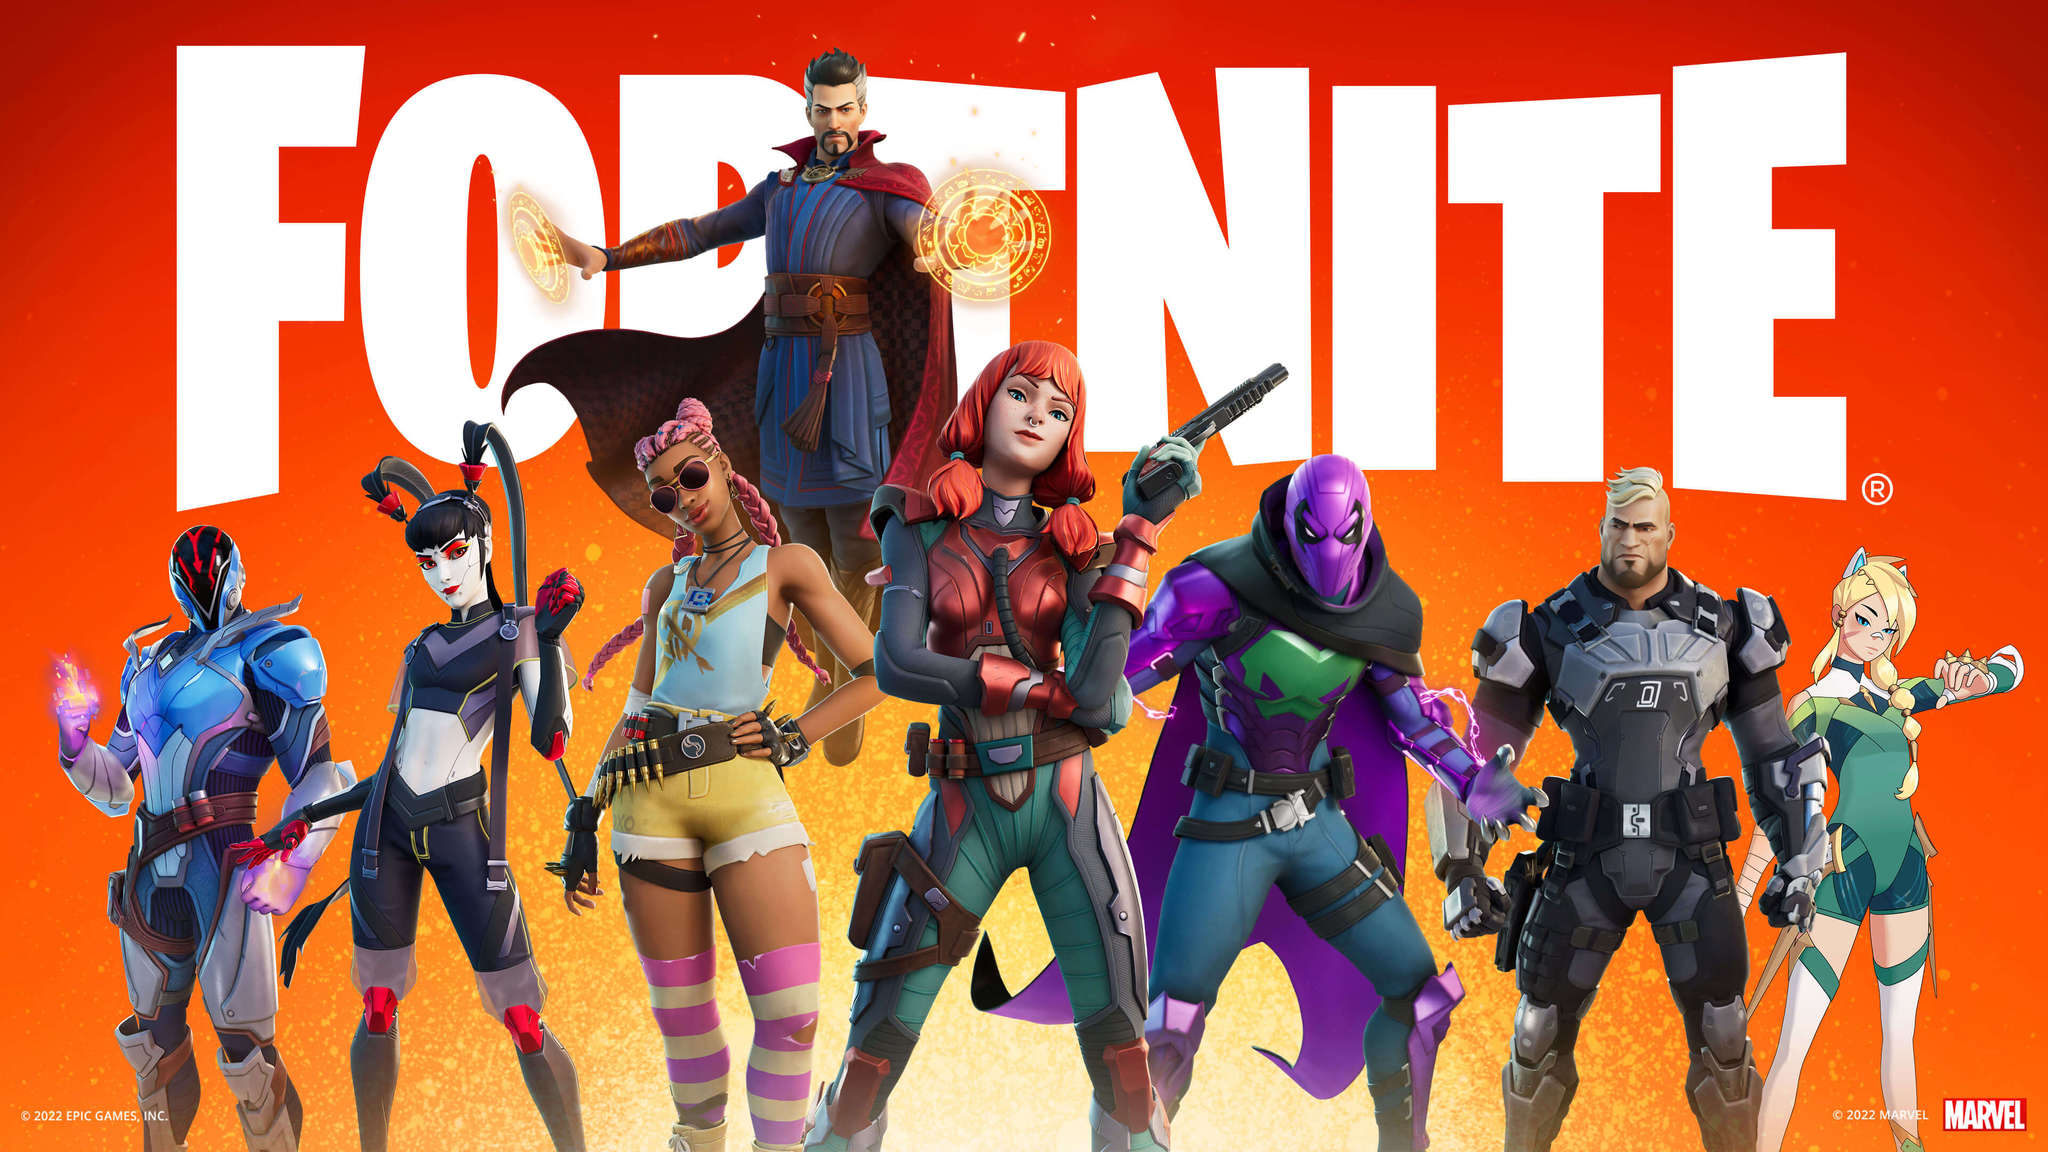 Fortnite returns to iOS, Android devices via Microsofts Xbox Cloud